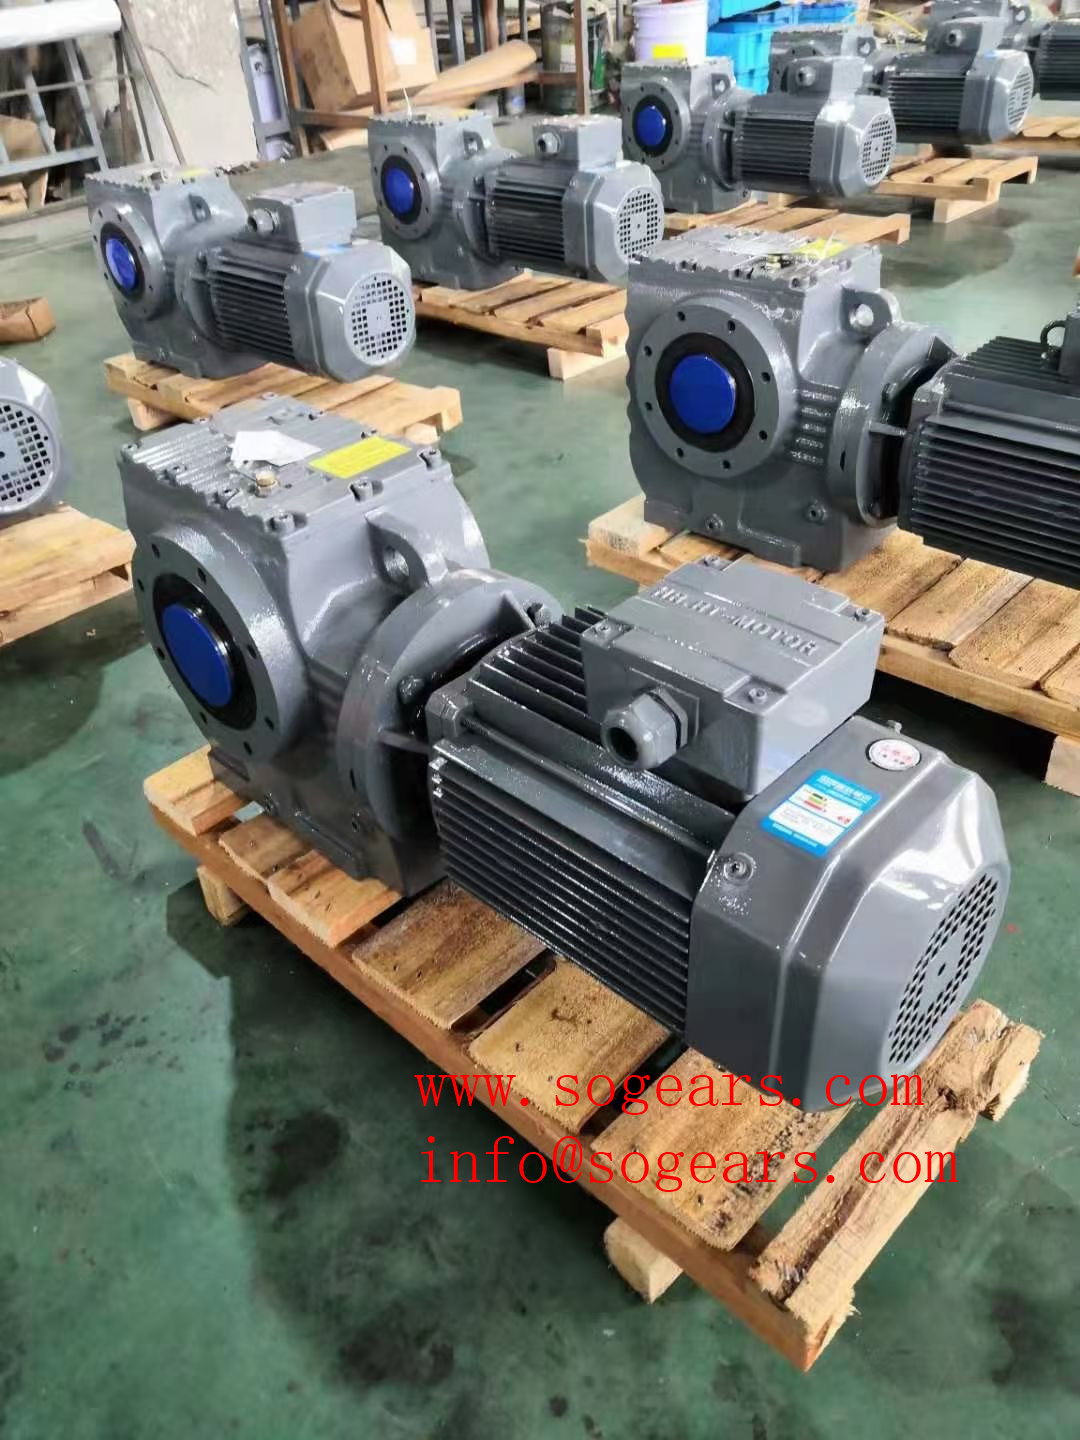 Gearbox FL40D0 1/3 HP 134976-01. Gear Box and Motor 21:1 ratio Details about   Swedrive AB 